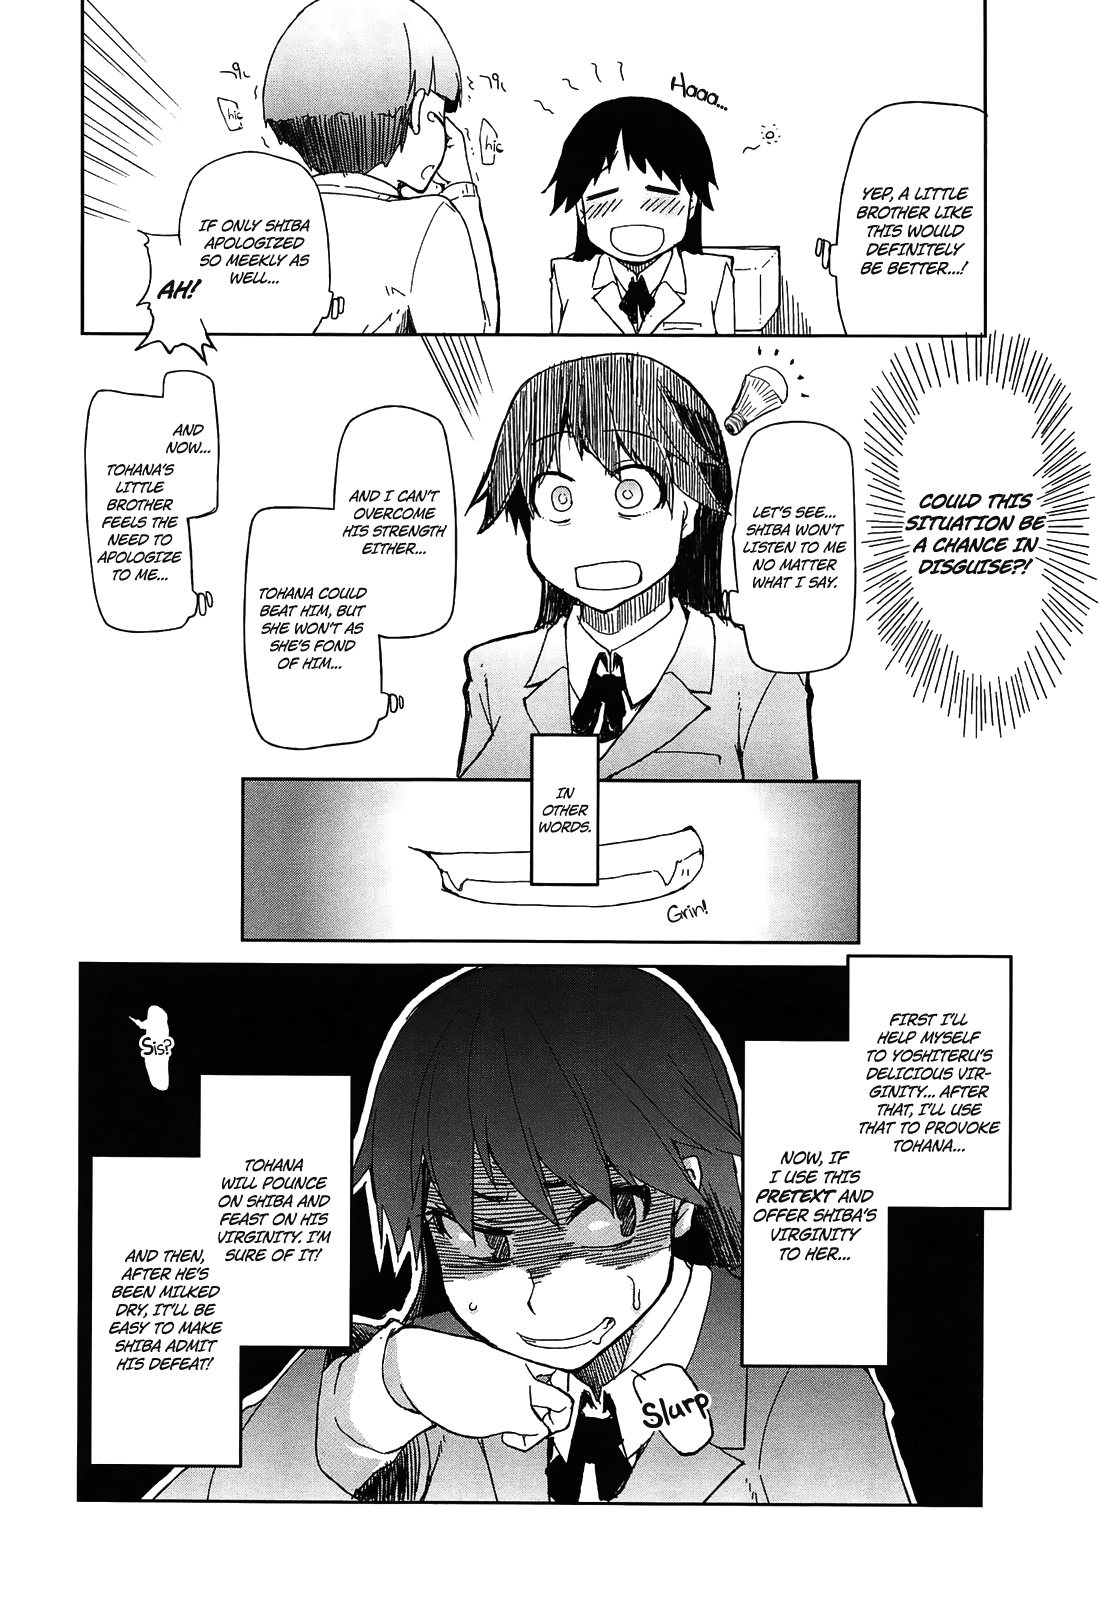 [Ryo] How To Eat Delicious Meat - Chapters 1 - 5 [English] =Anonymous + maipantsu + EroMangaGirls= page 23 full